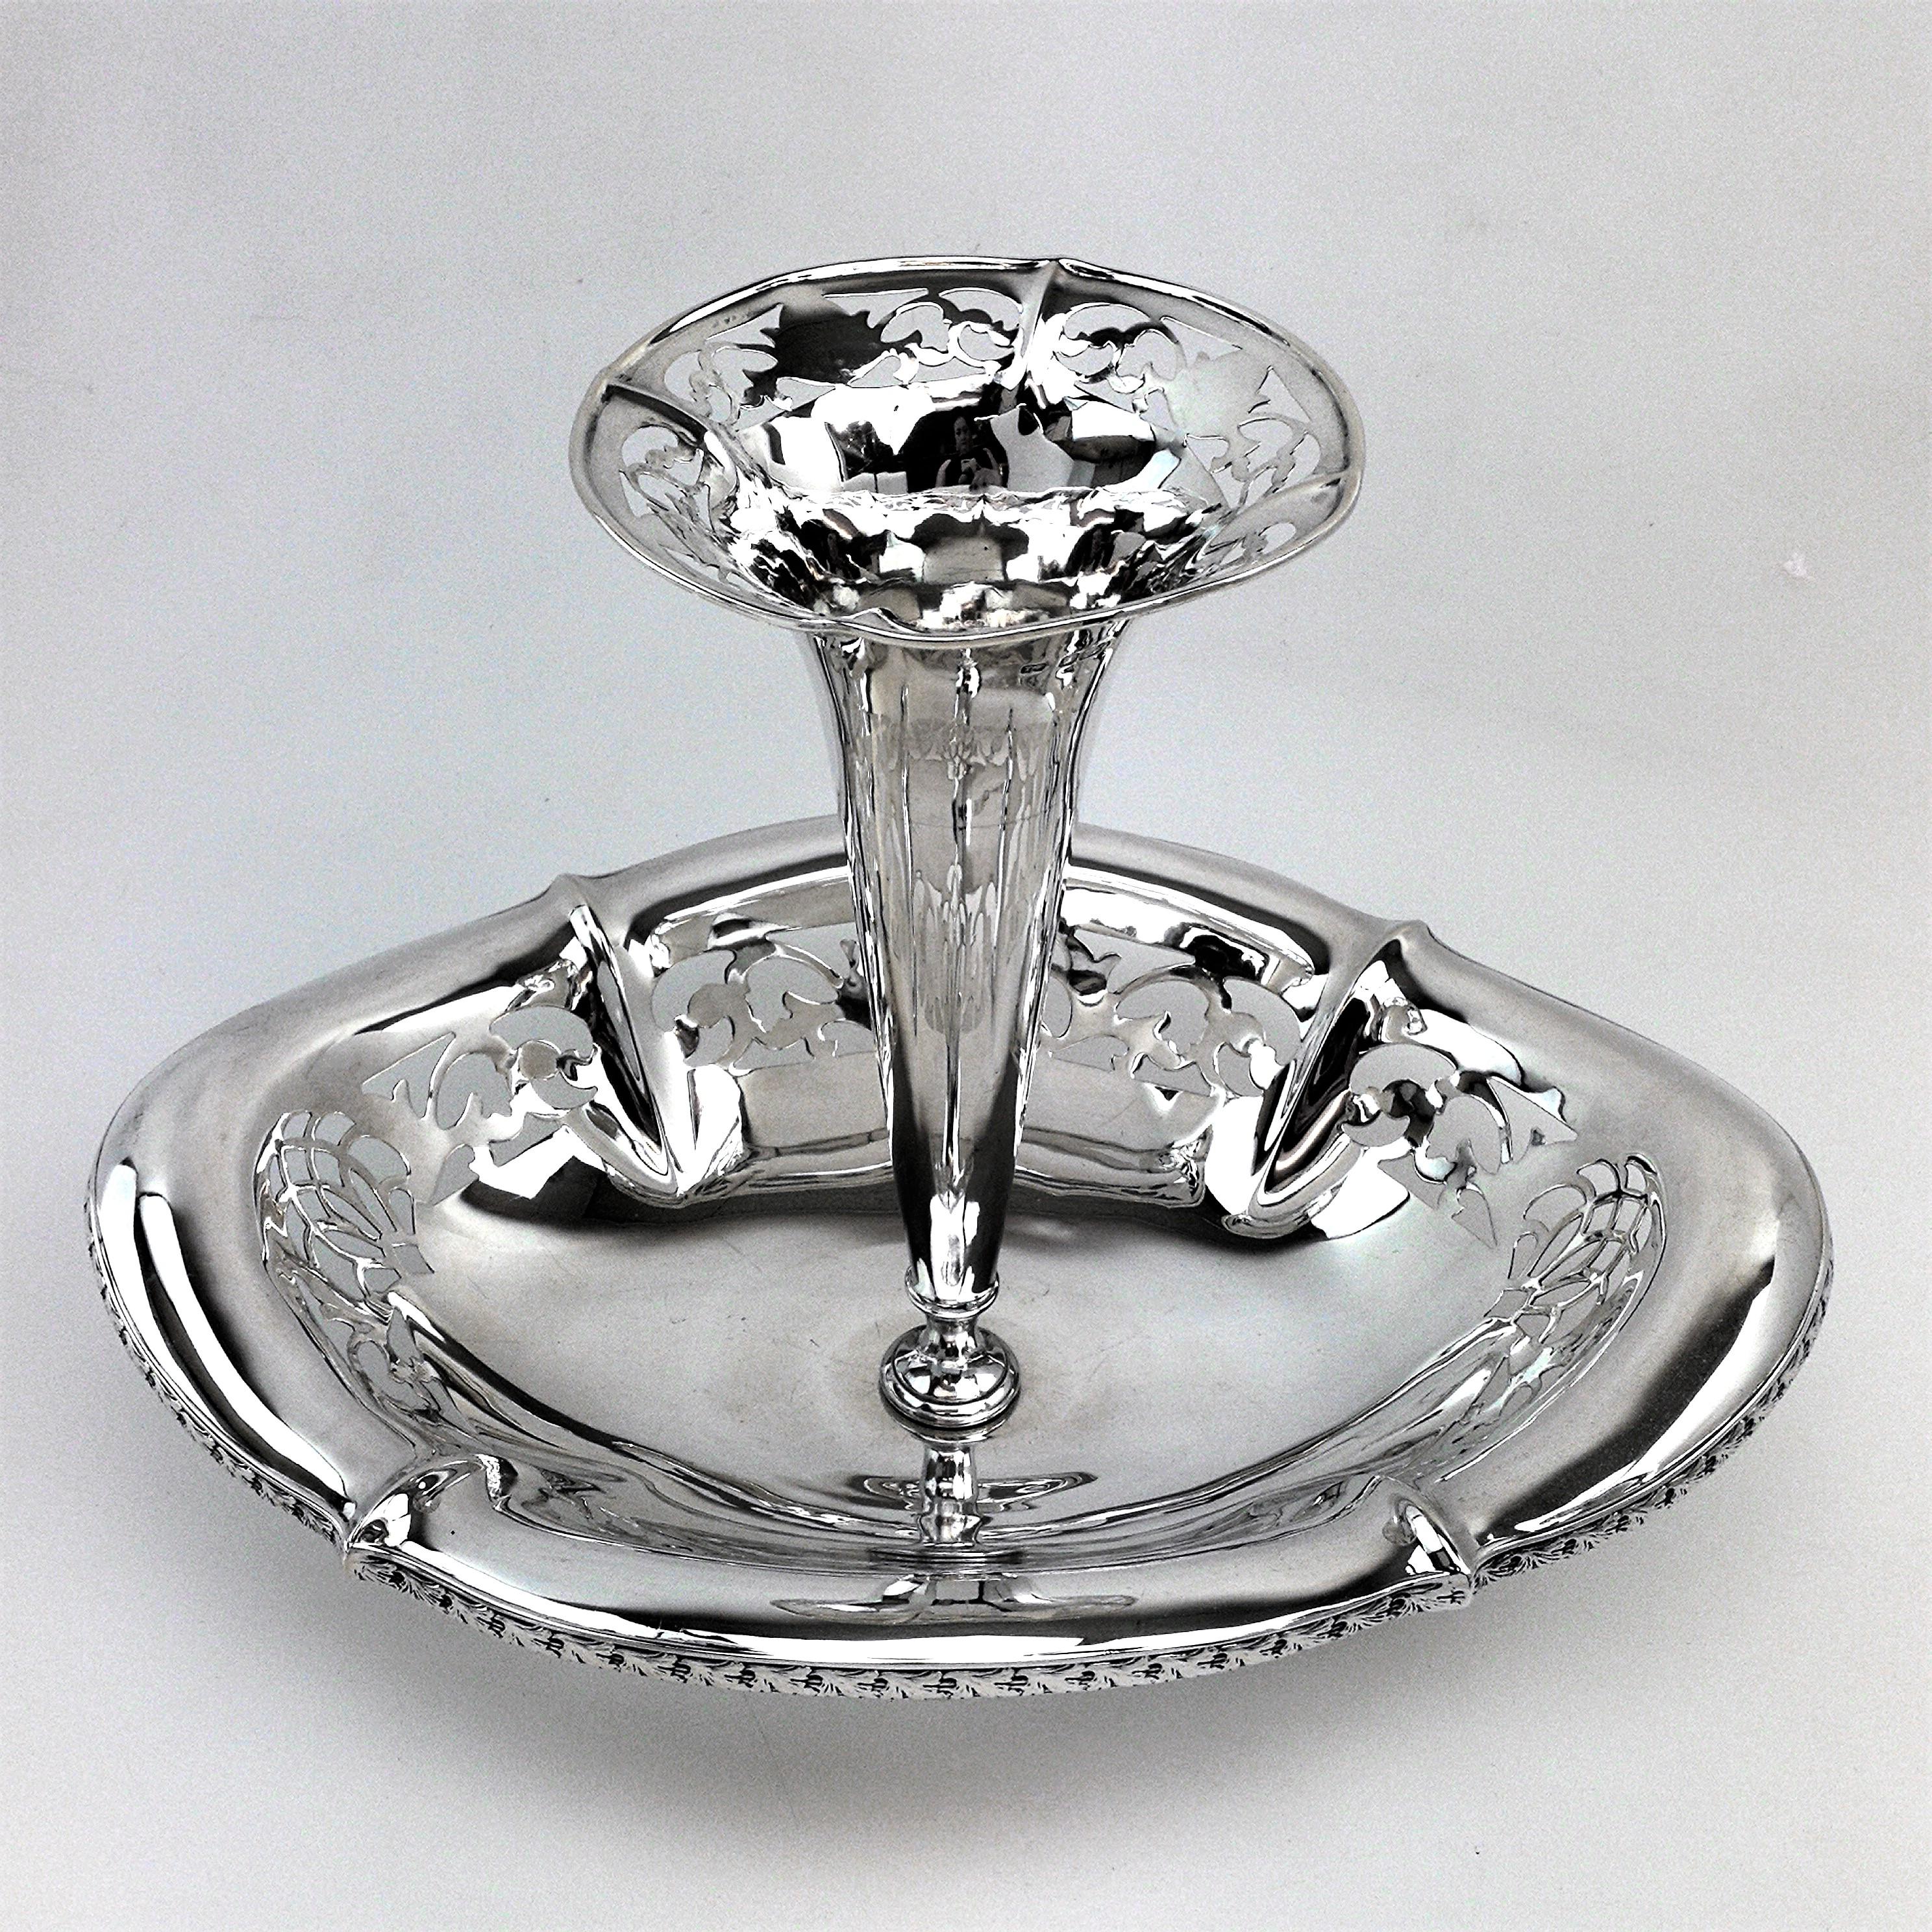 Early 20th Century Antique Sterling Silver Epergne / Centrepiece / Vase 1911 For Sale